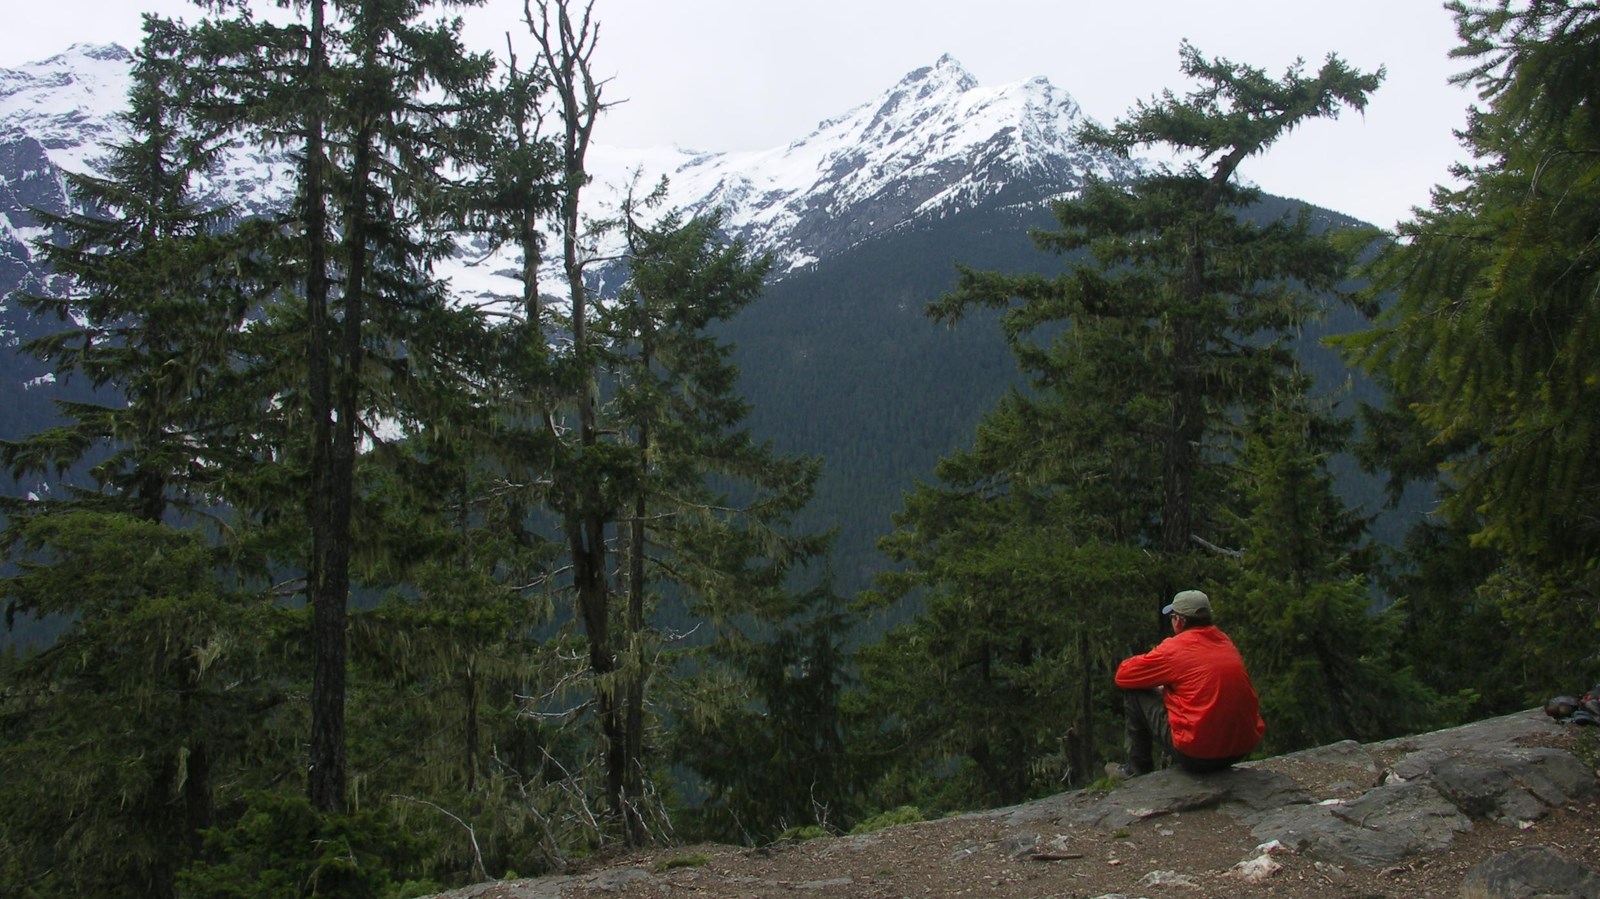 A person sits in the forest looking at a mountain view.